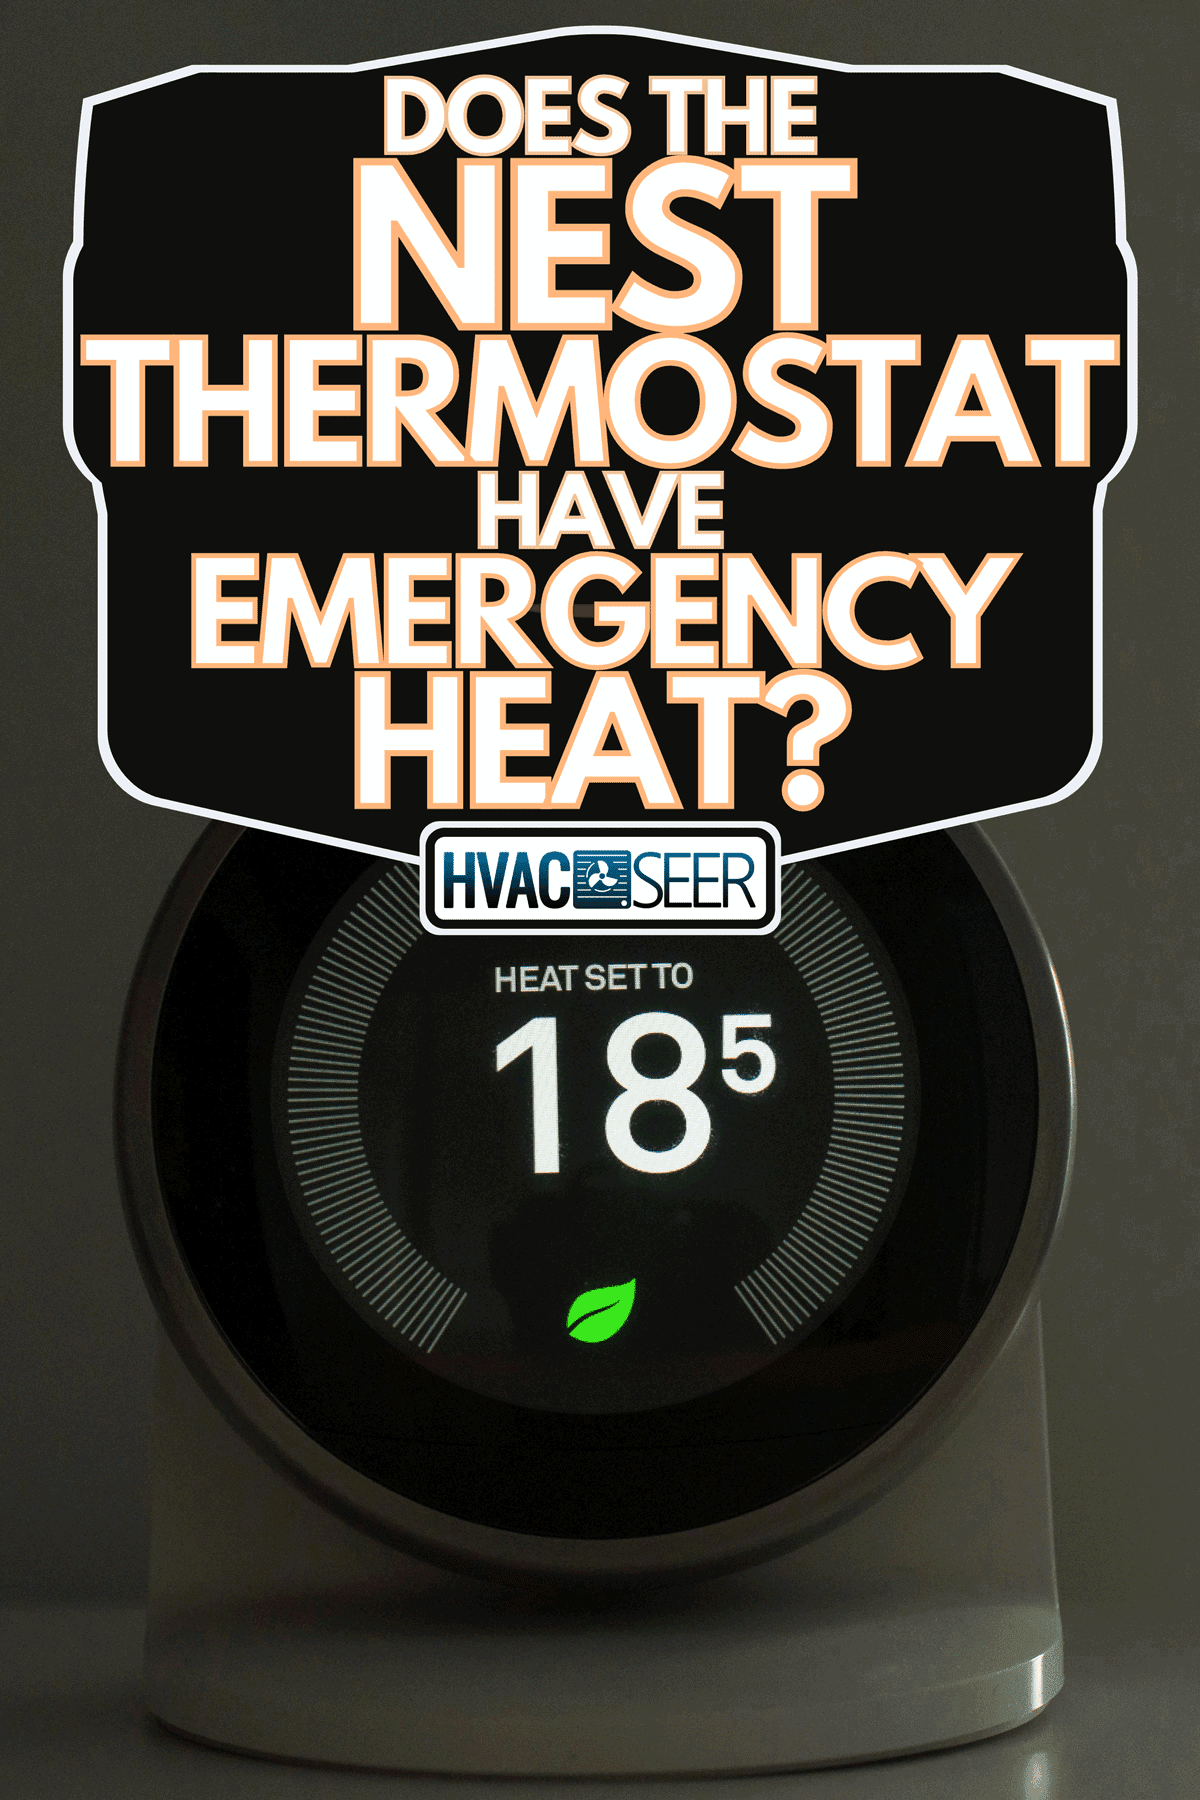 Nest thermostat is set to emergency heat, Does The Nest Thermostat Have Emergency Heat?